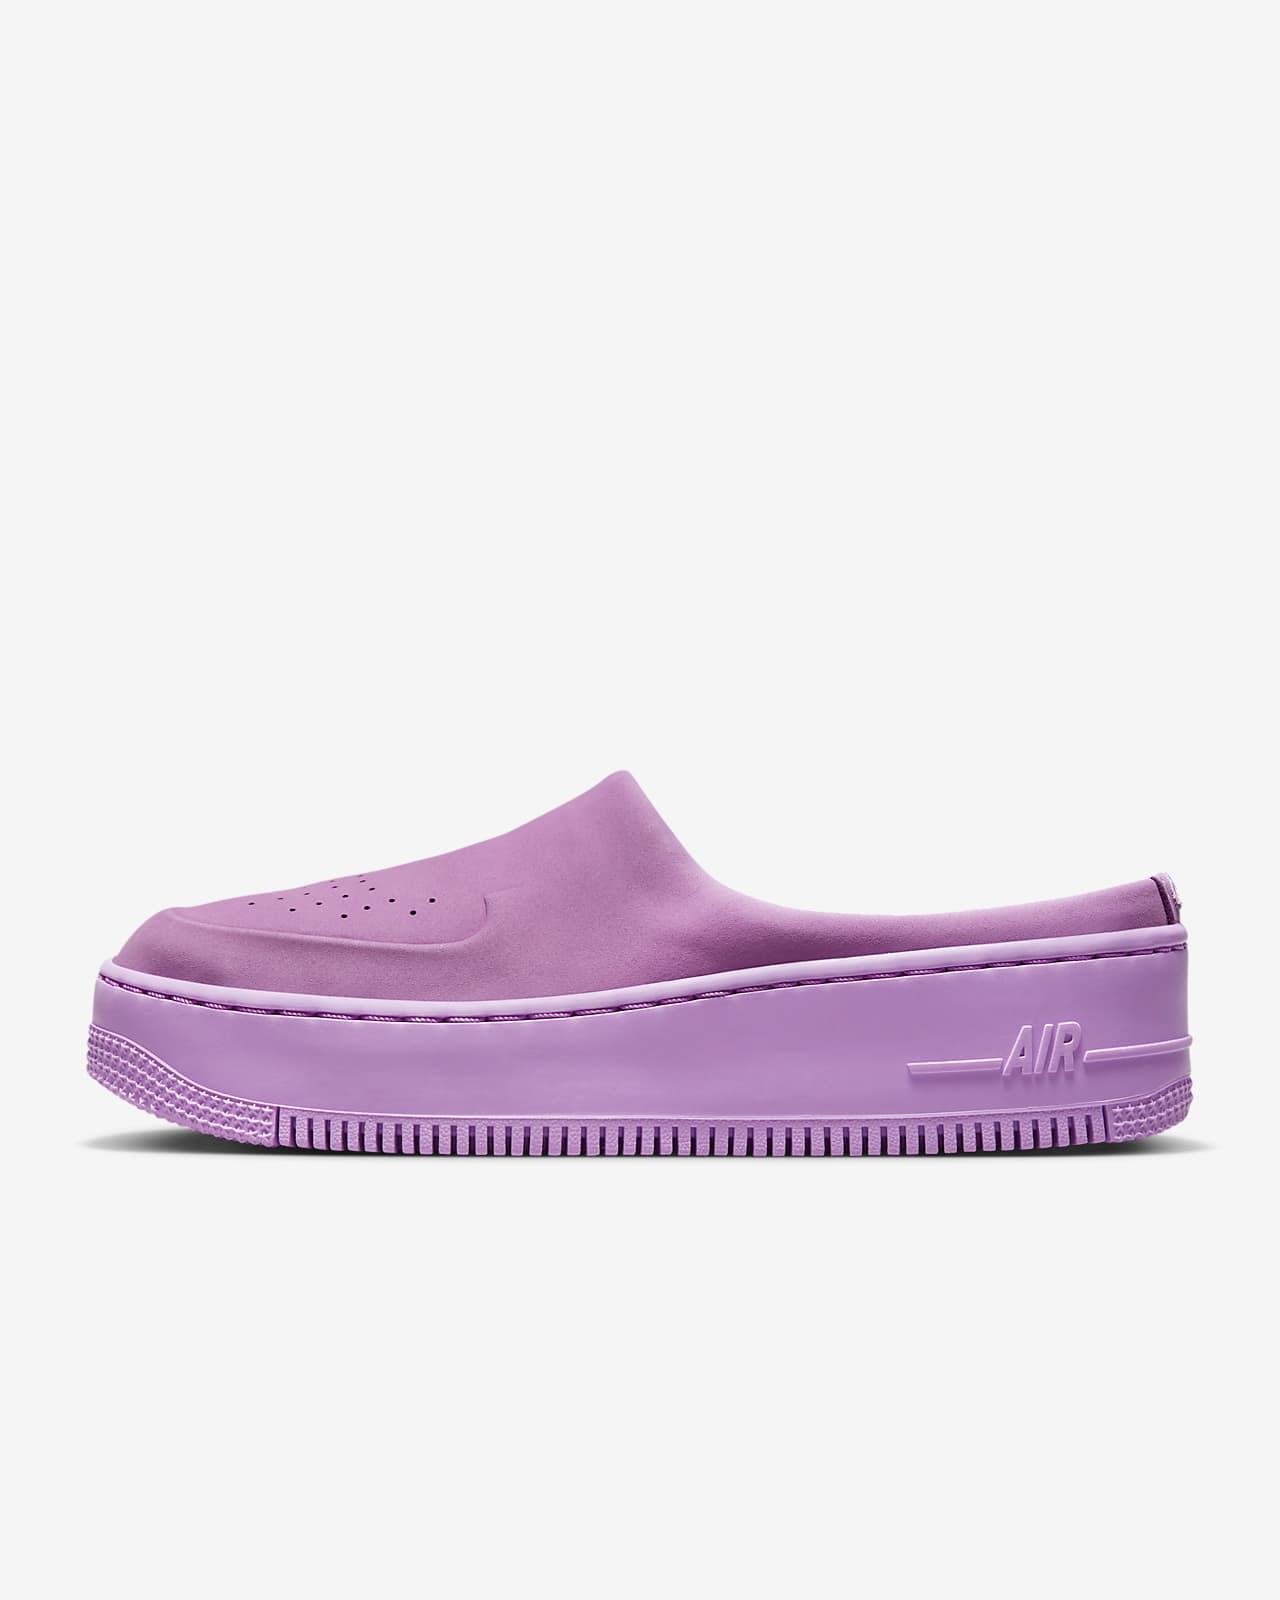 Nike Air Force 1 Lover XX Women's Shoes